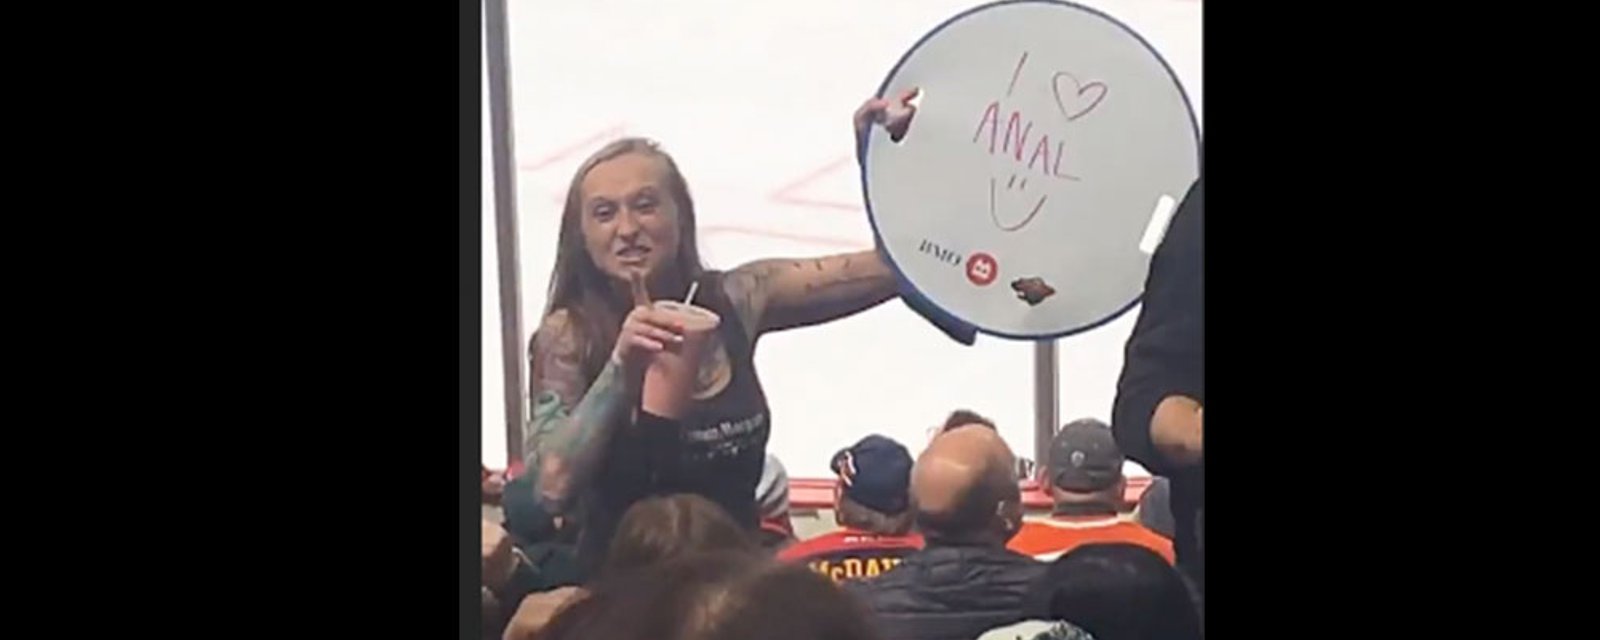 Woman flashes “I Love Anal” sign at NHL game and the crowd goes wild!